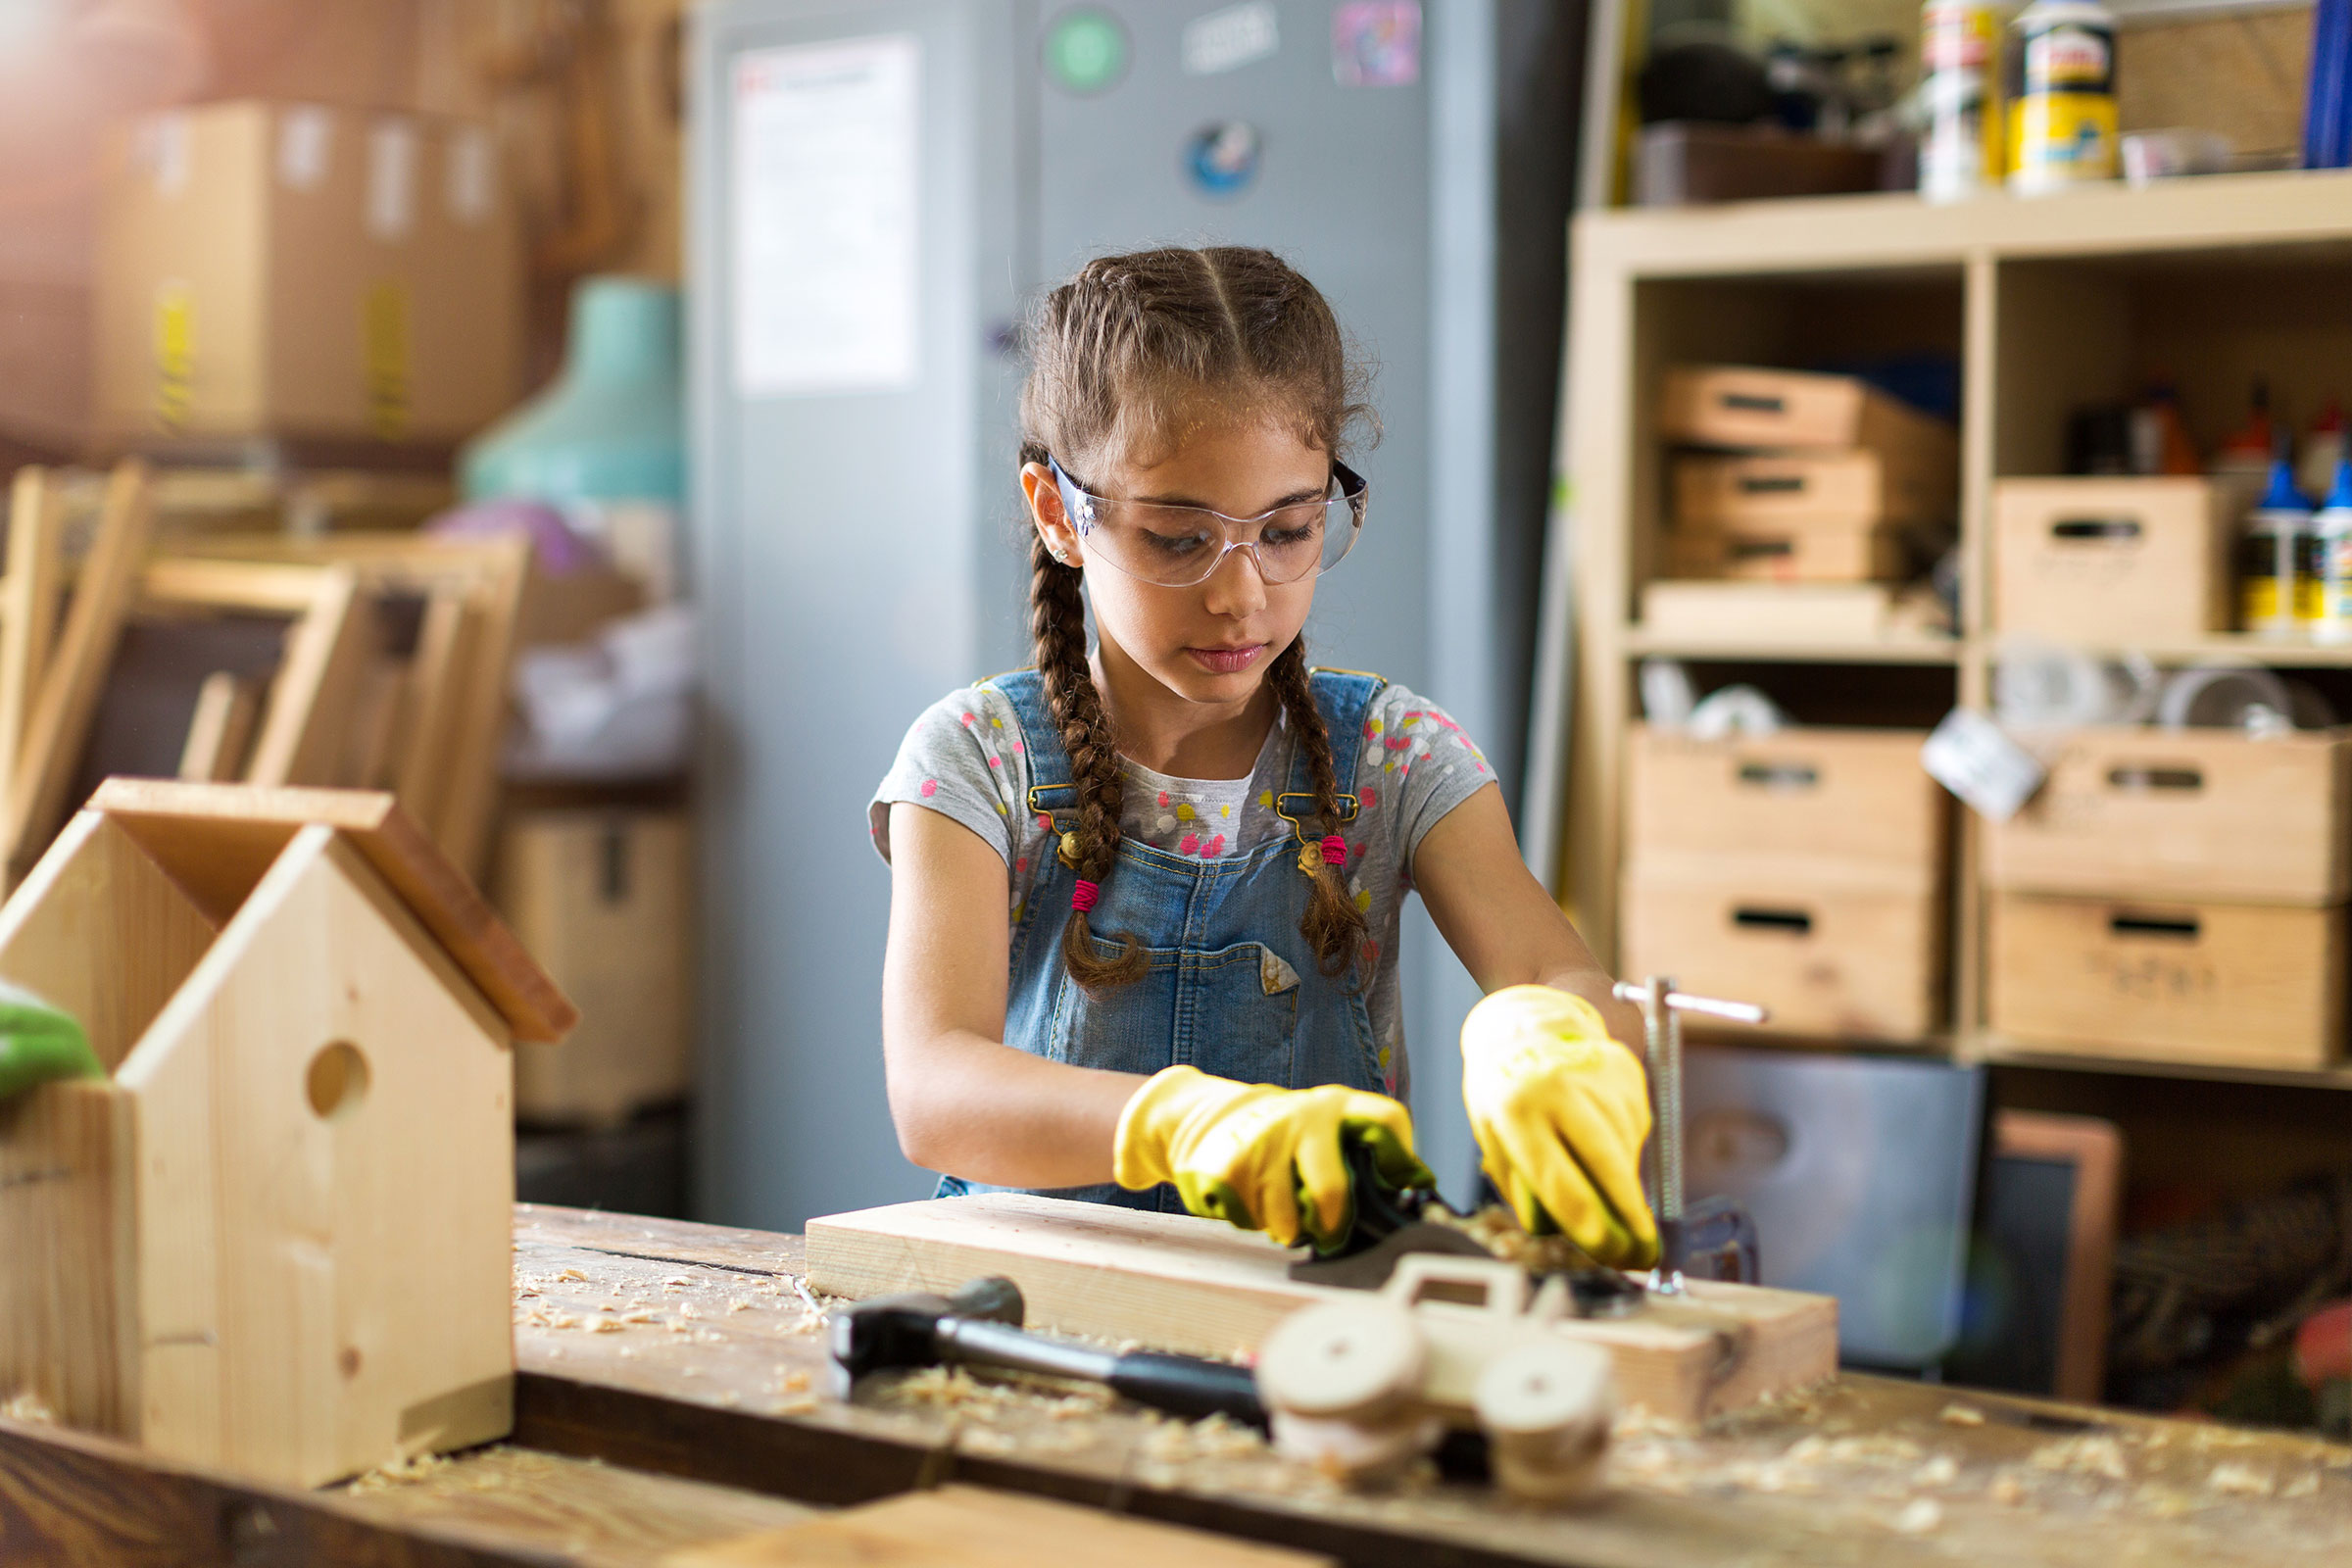 A young girl wearing safety glasses and gloves carves wooden toys on a work bench.